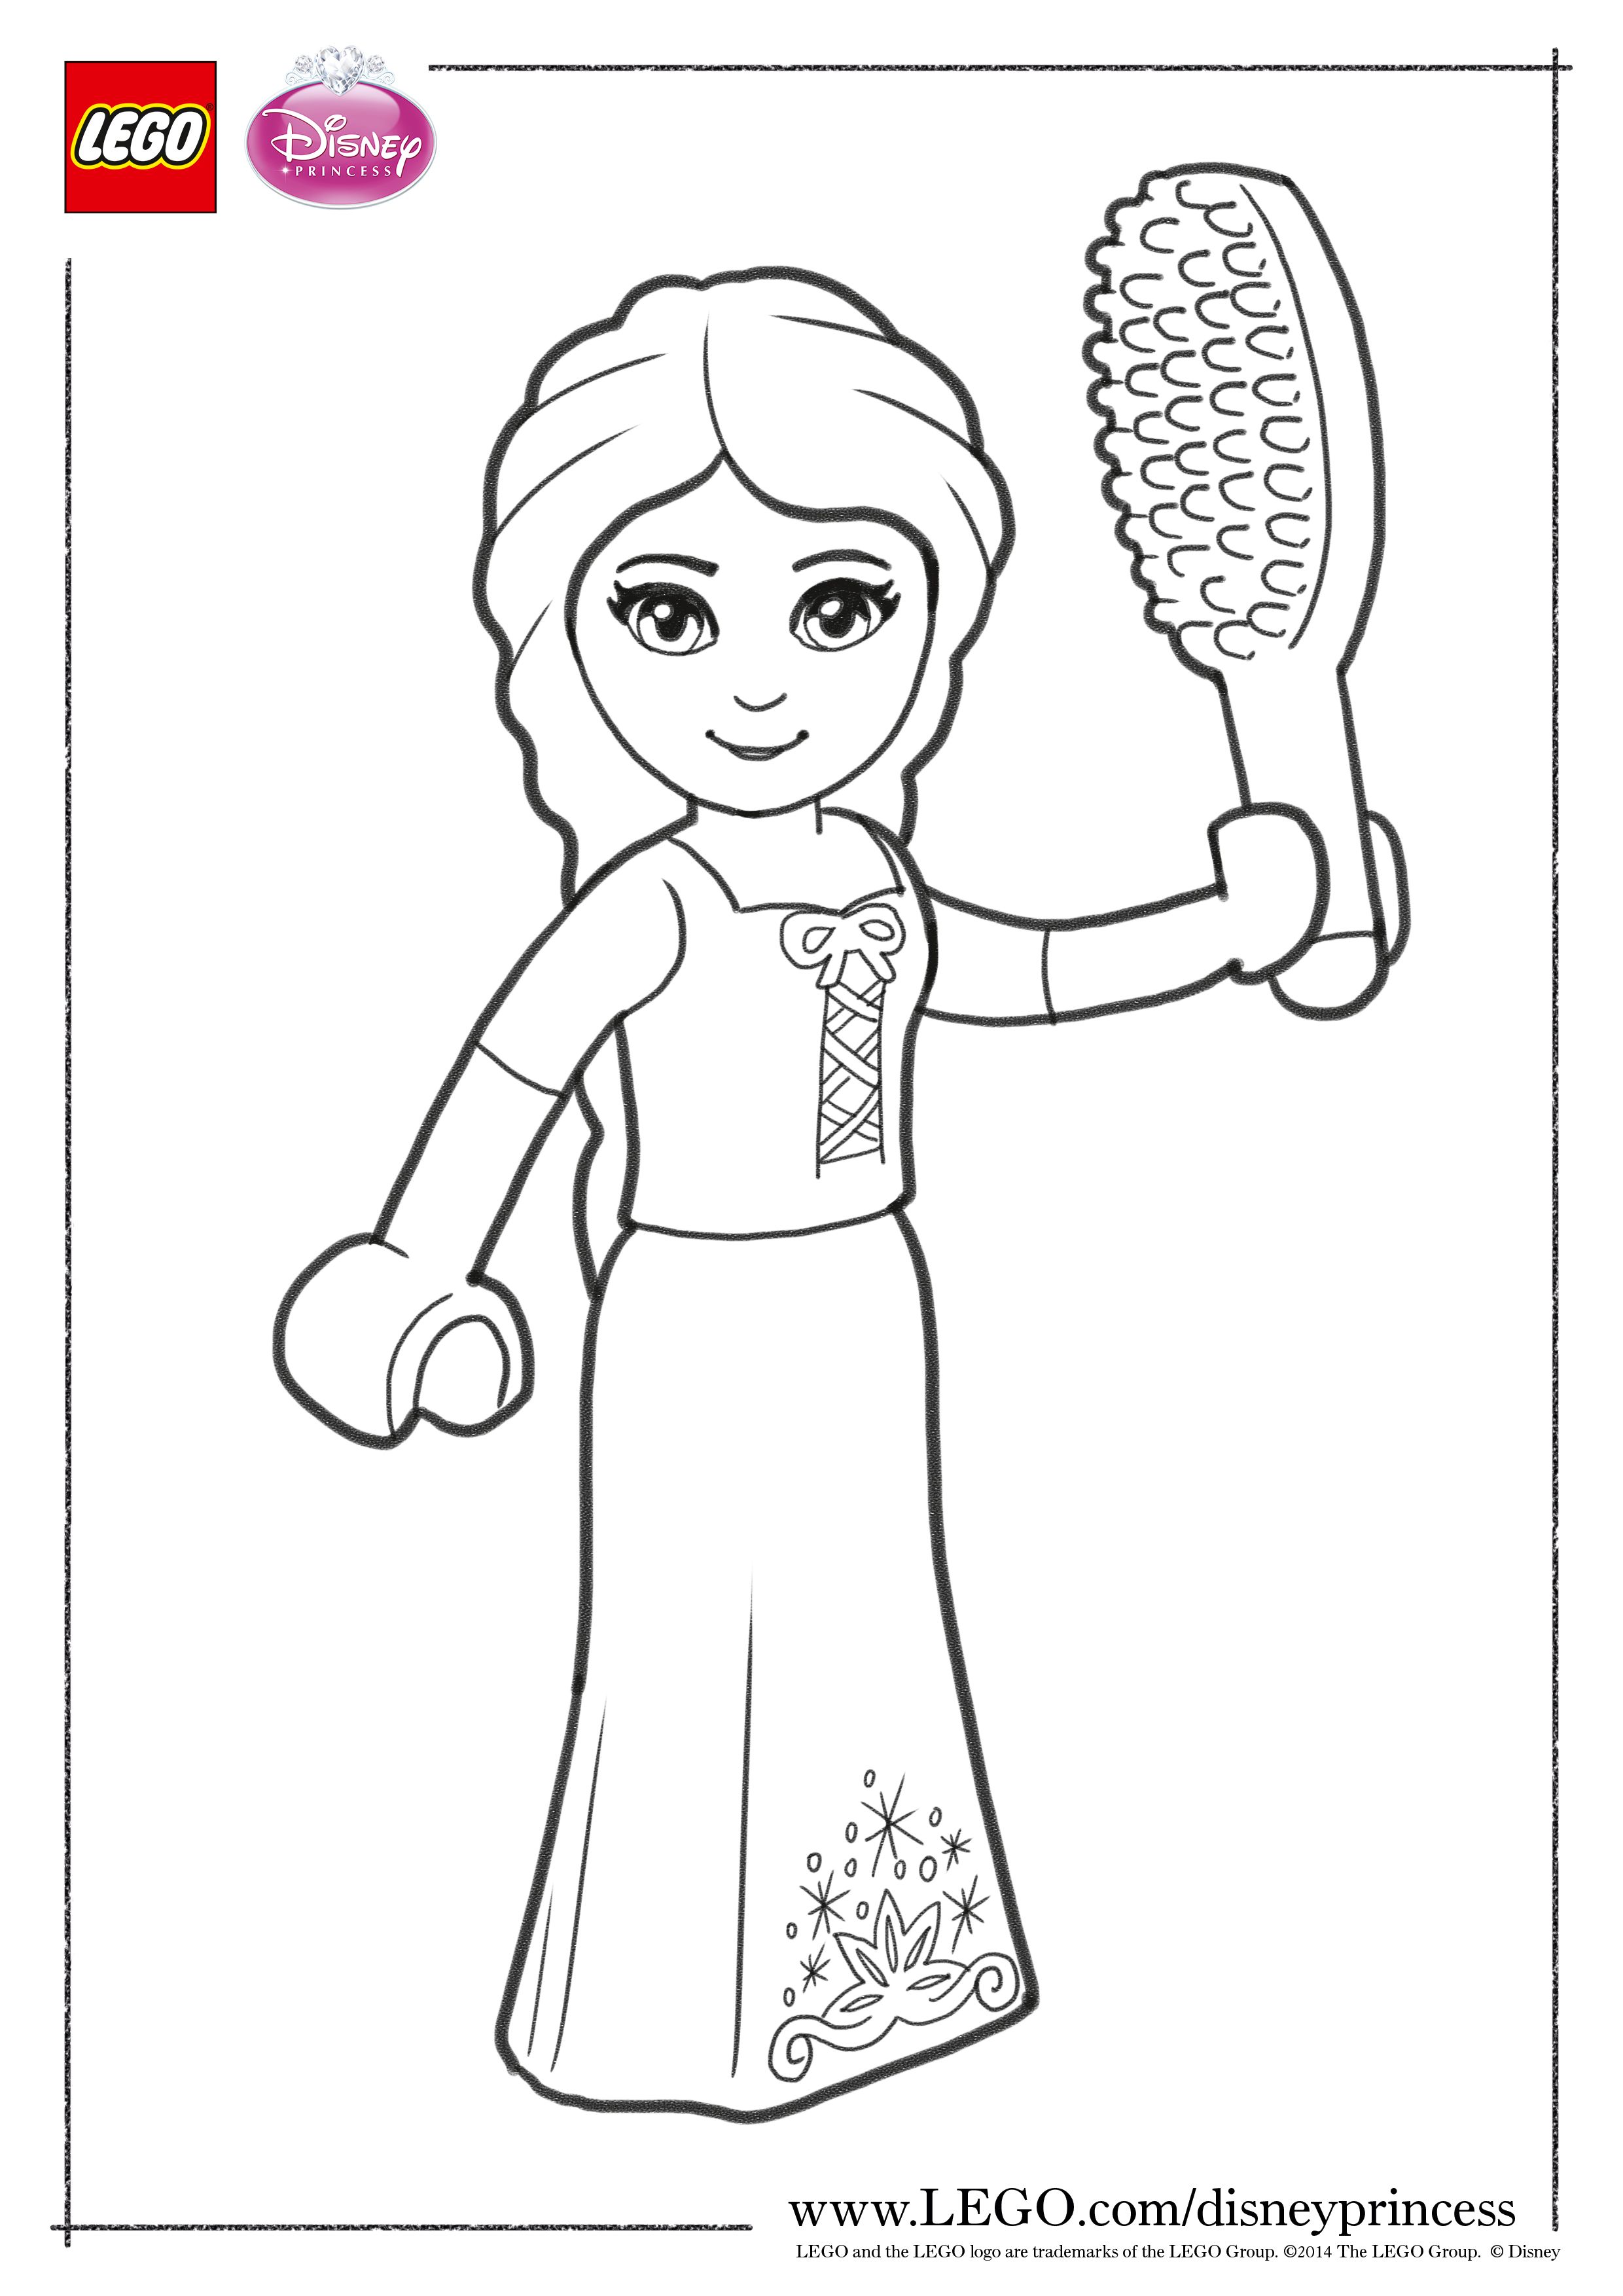 Lego Disney Princesses Coloring Pages   Coloring Home